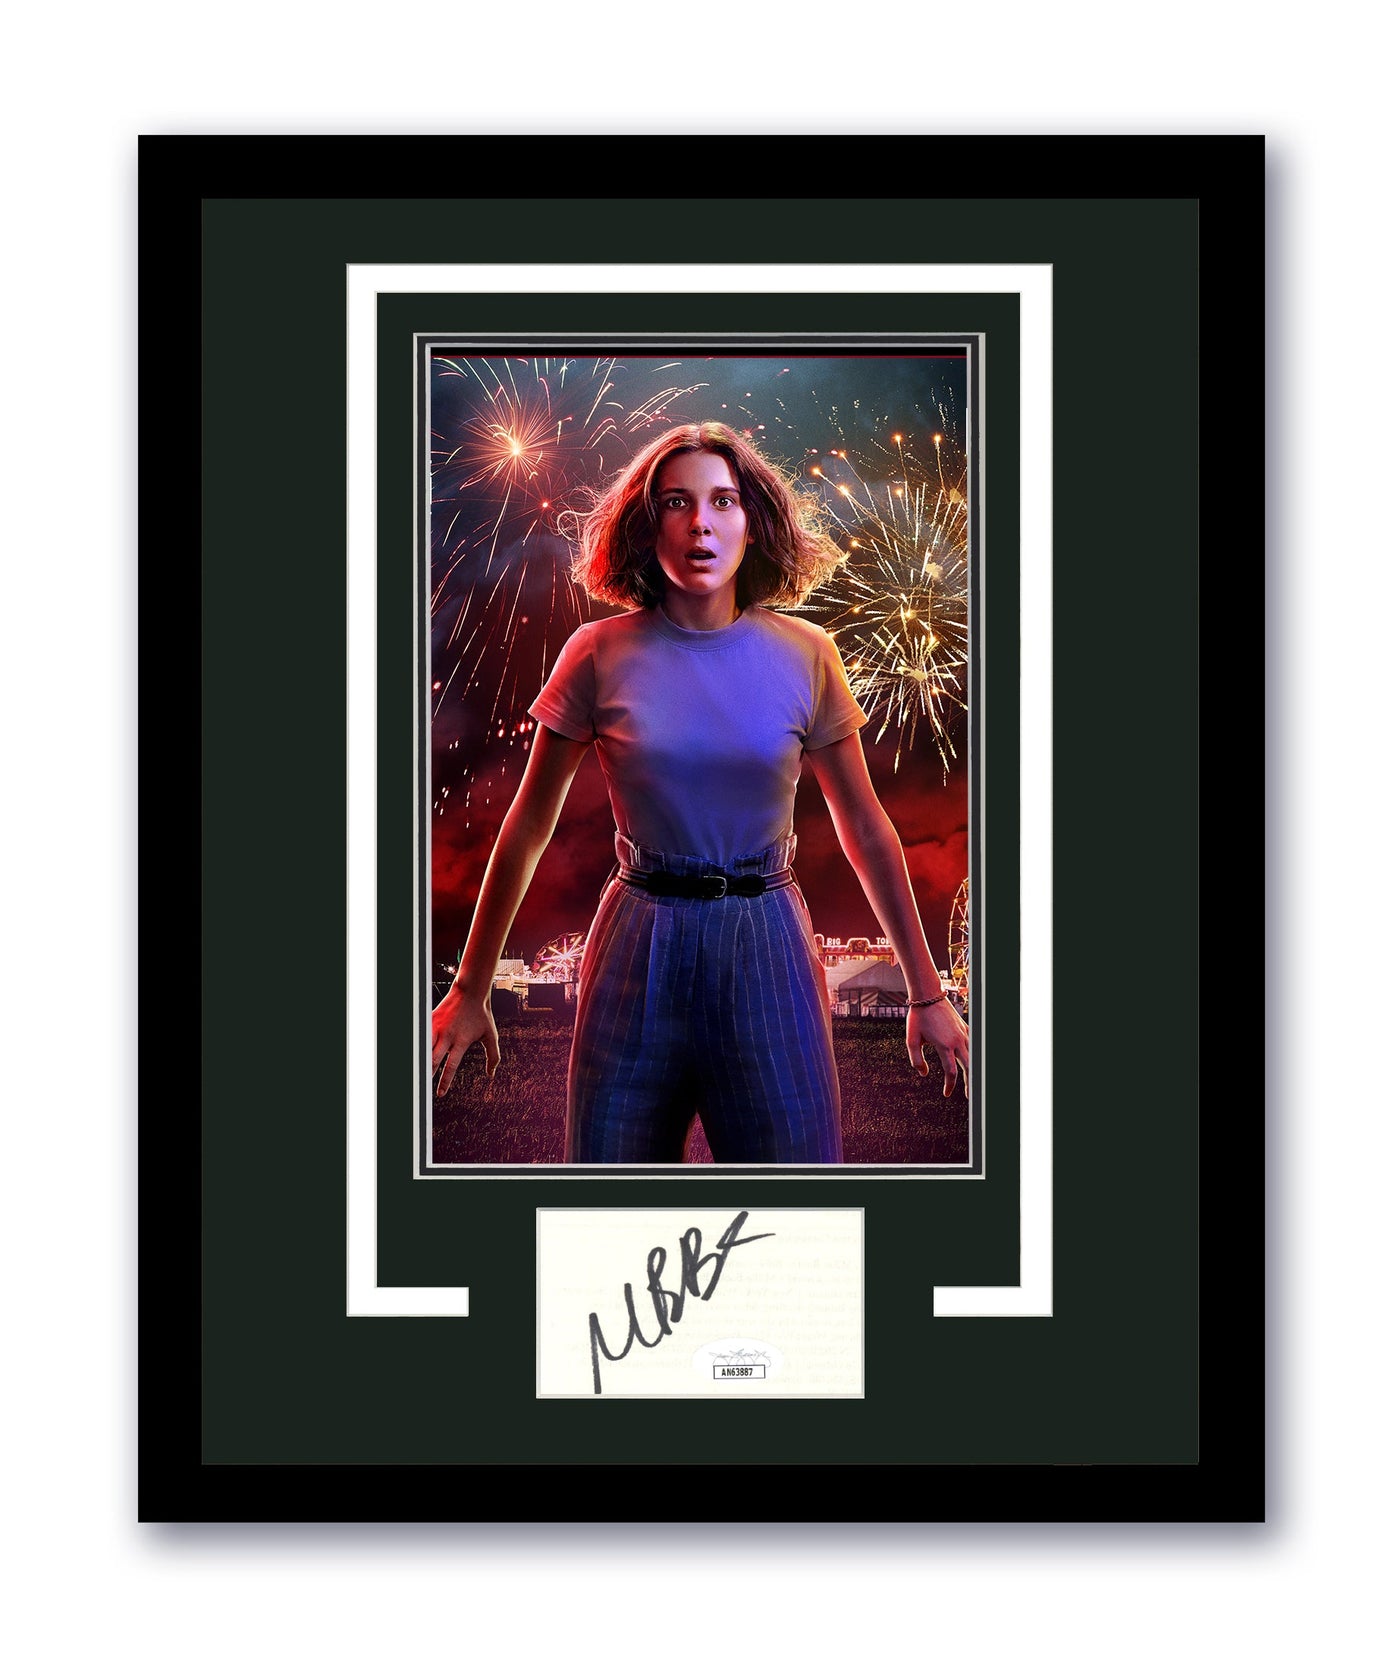 Millie Bobby Brown Signed Stranger Things 11x14 Framed Authentic Autographed JSA 5